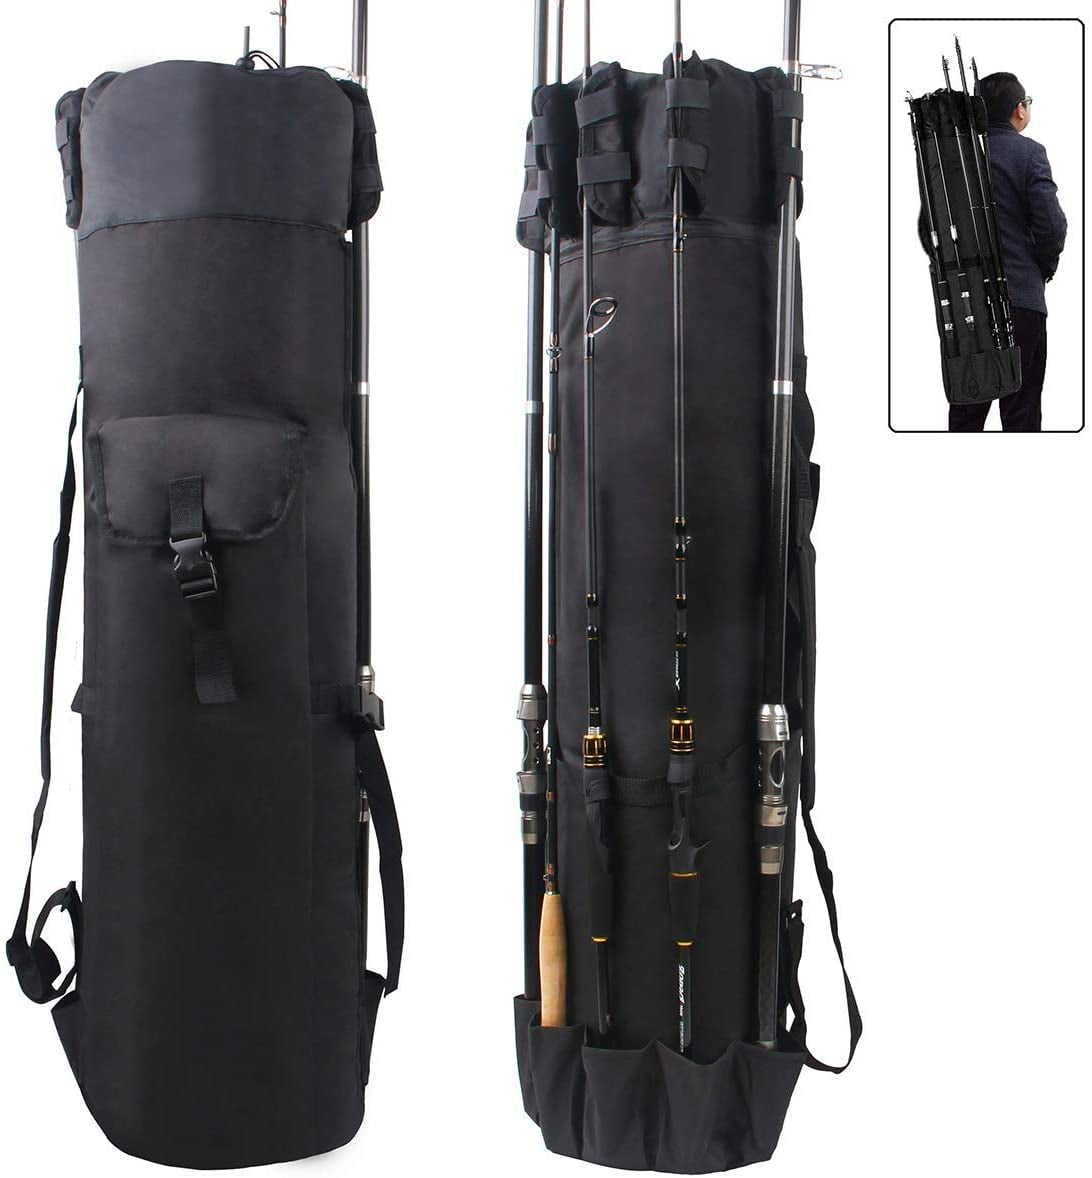 Tomshine Waterproof Pvc Fishing Rod Bag Fishing Pole Carrying Bag Case For Fishing Rod Bait Line Tackle Storage Bag Other